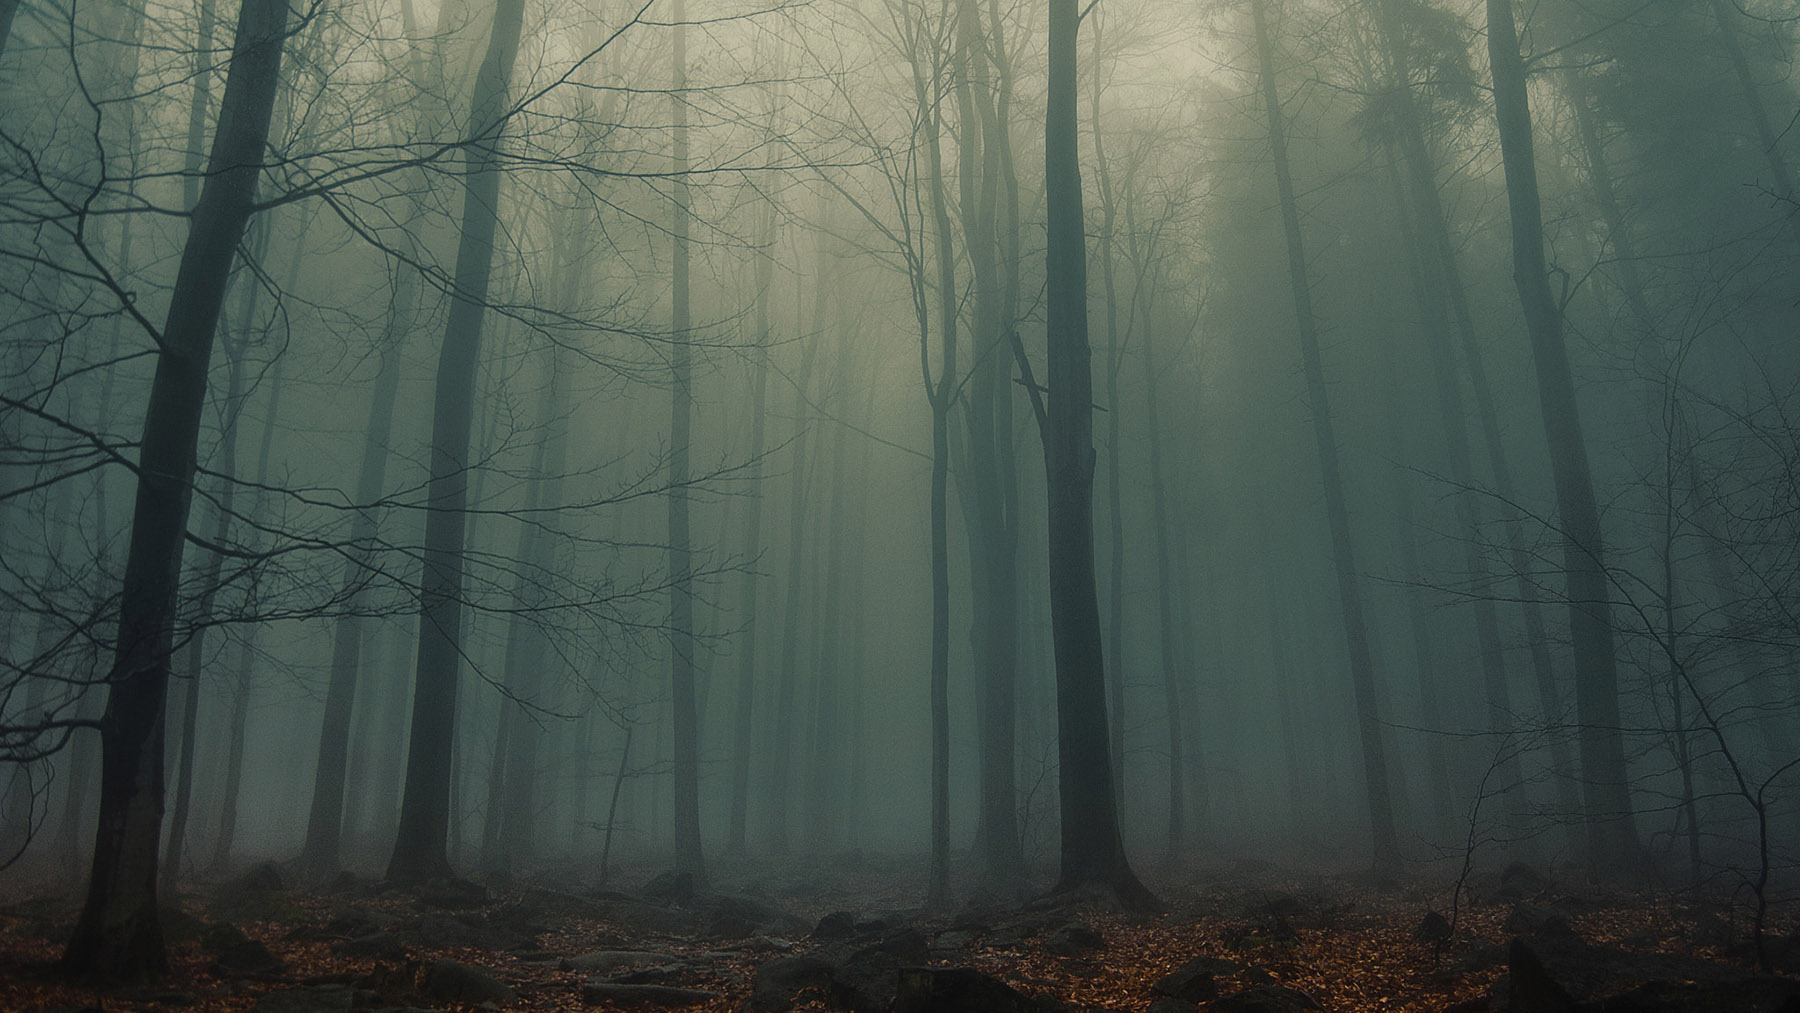 Stock photo of a wooded area blanketed in fog (Wikimedia Commons photo, courtesy of RawPixel.com)